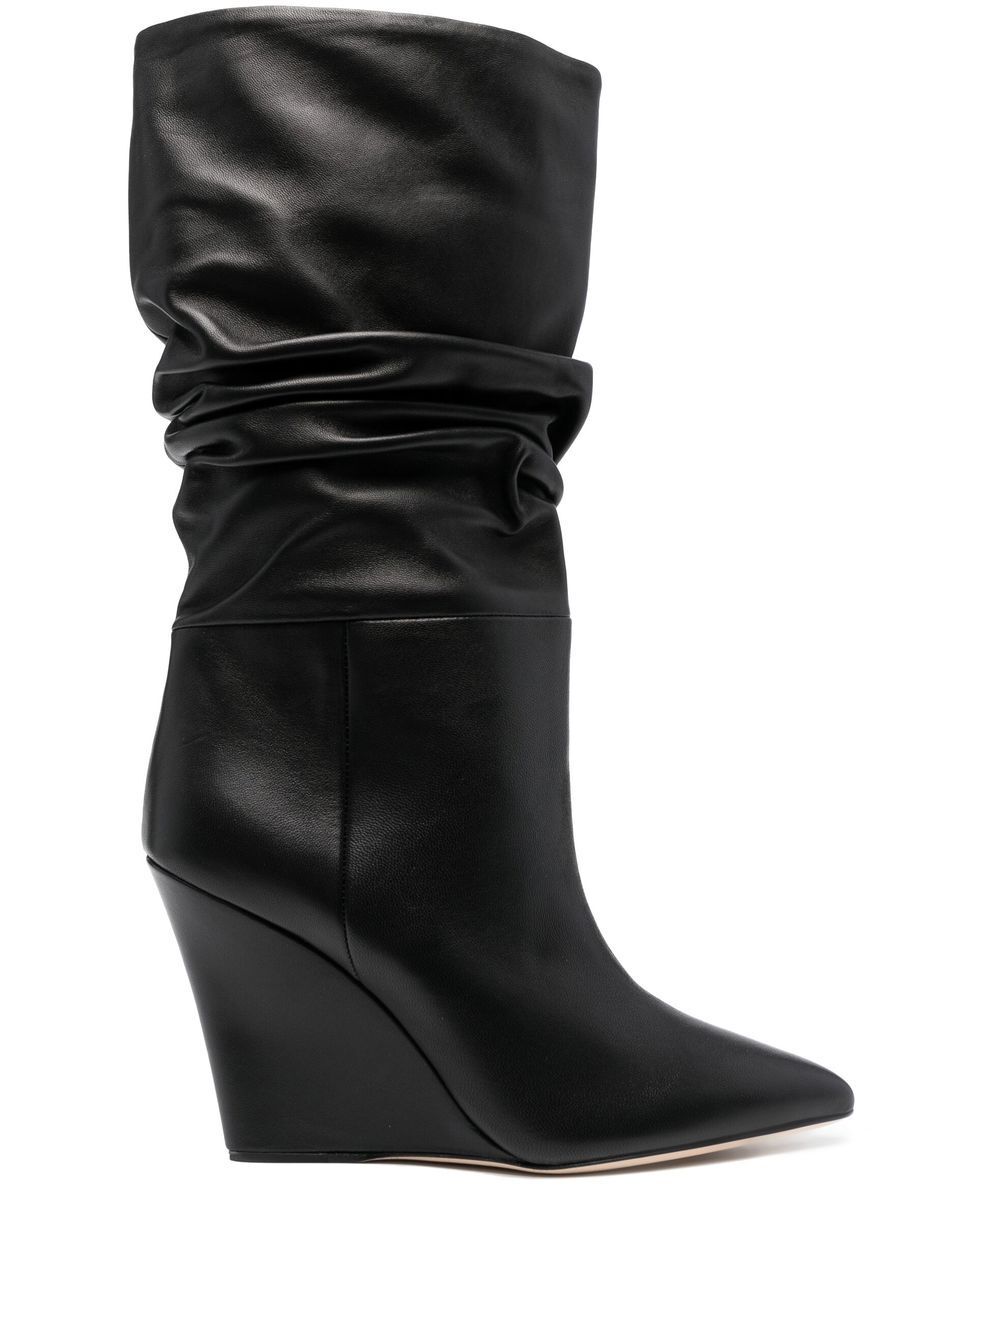 Paris Texas pointed leather wedge boots - Black